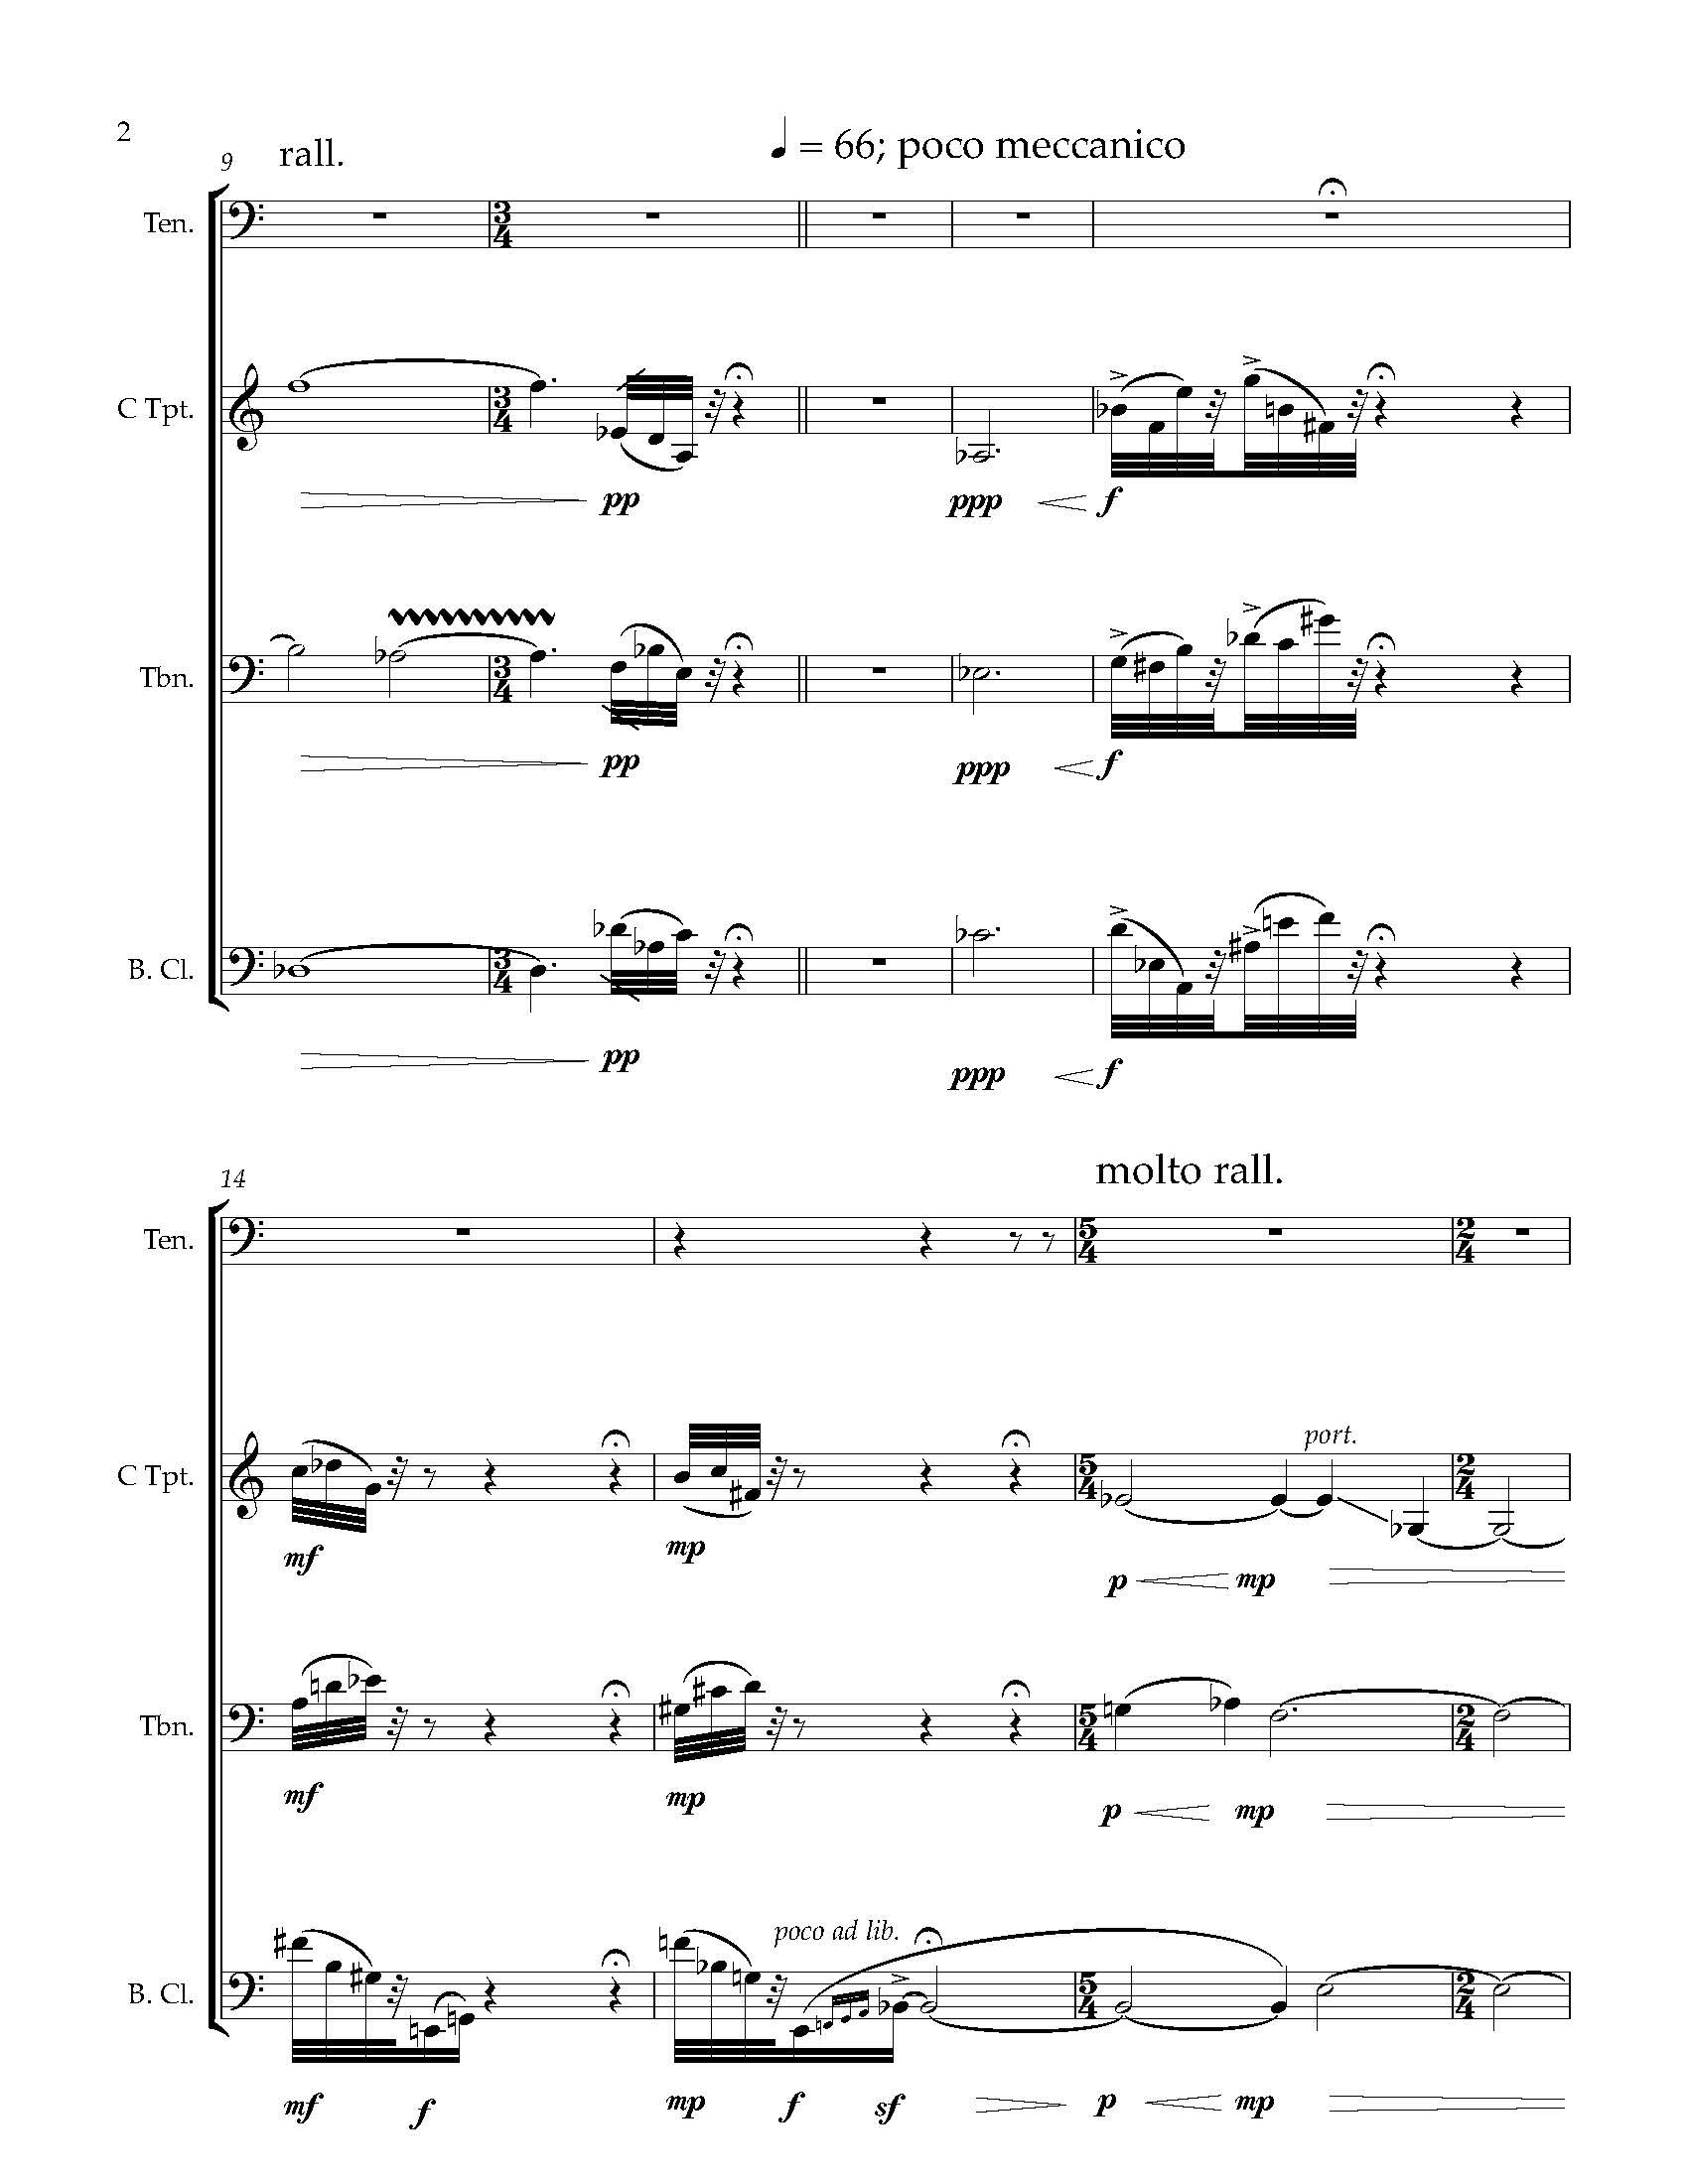 Many Worlds [1] - Complete Score_Page_11.jpg